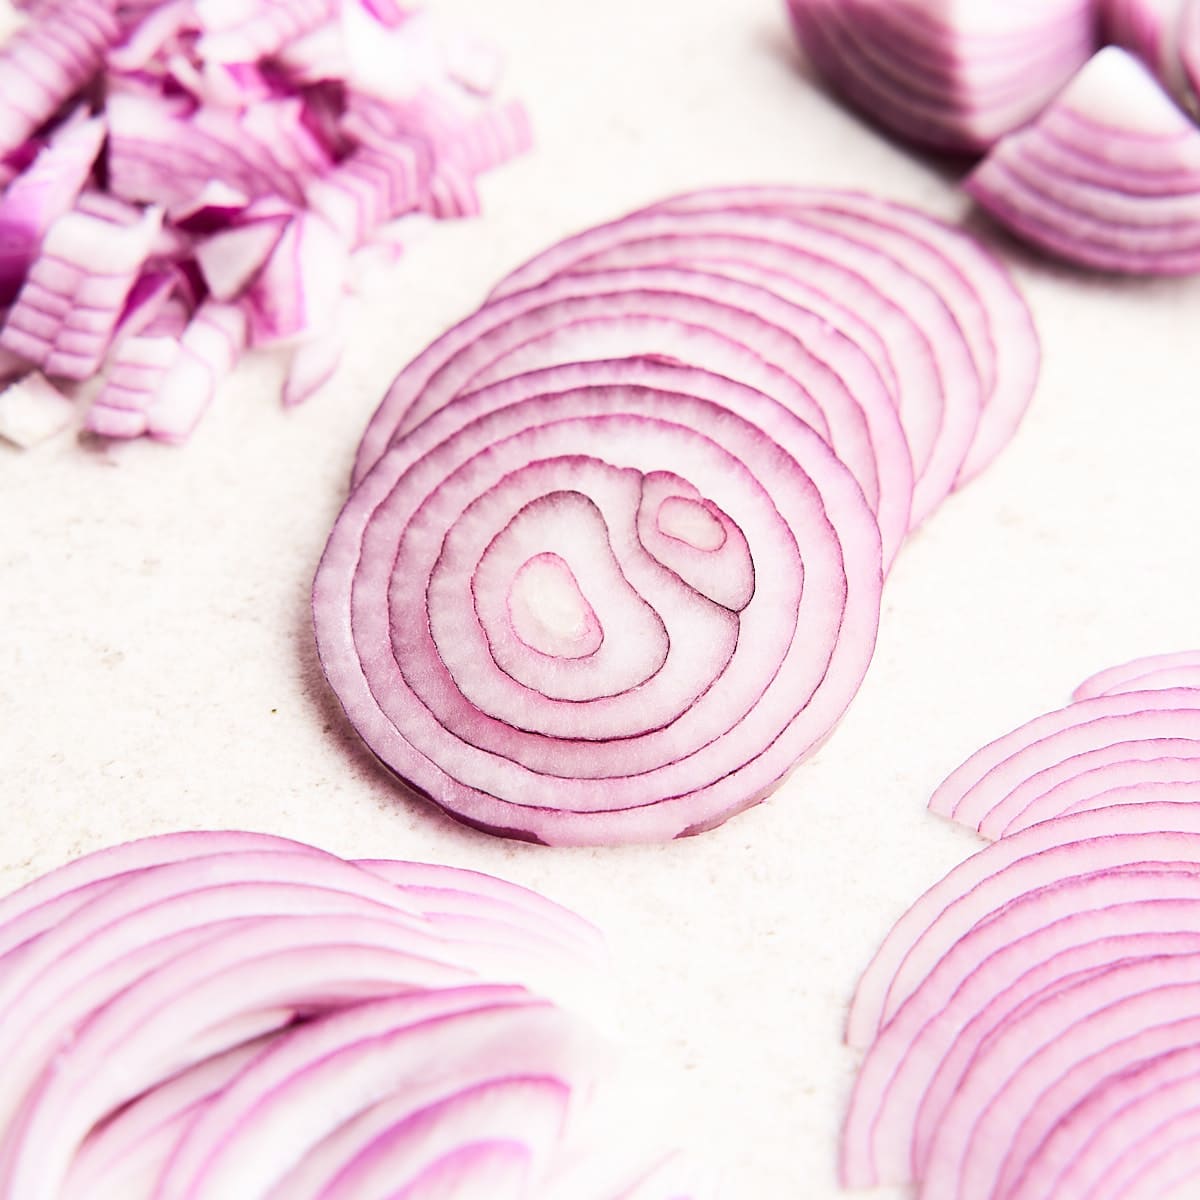 Paper-thin onion slices